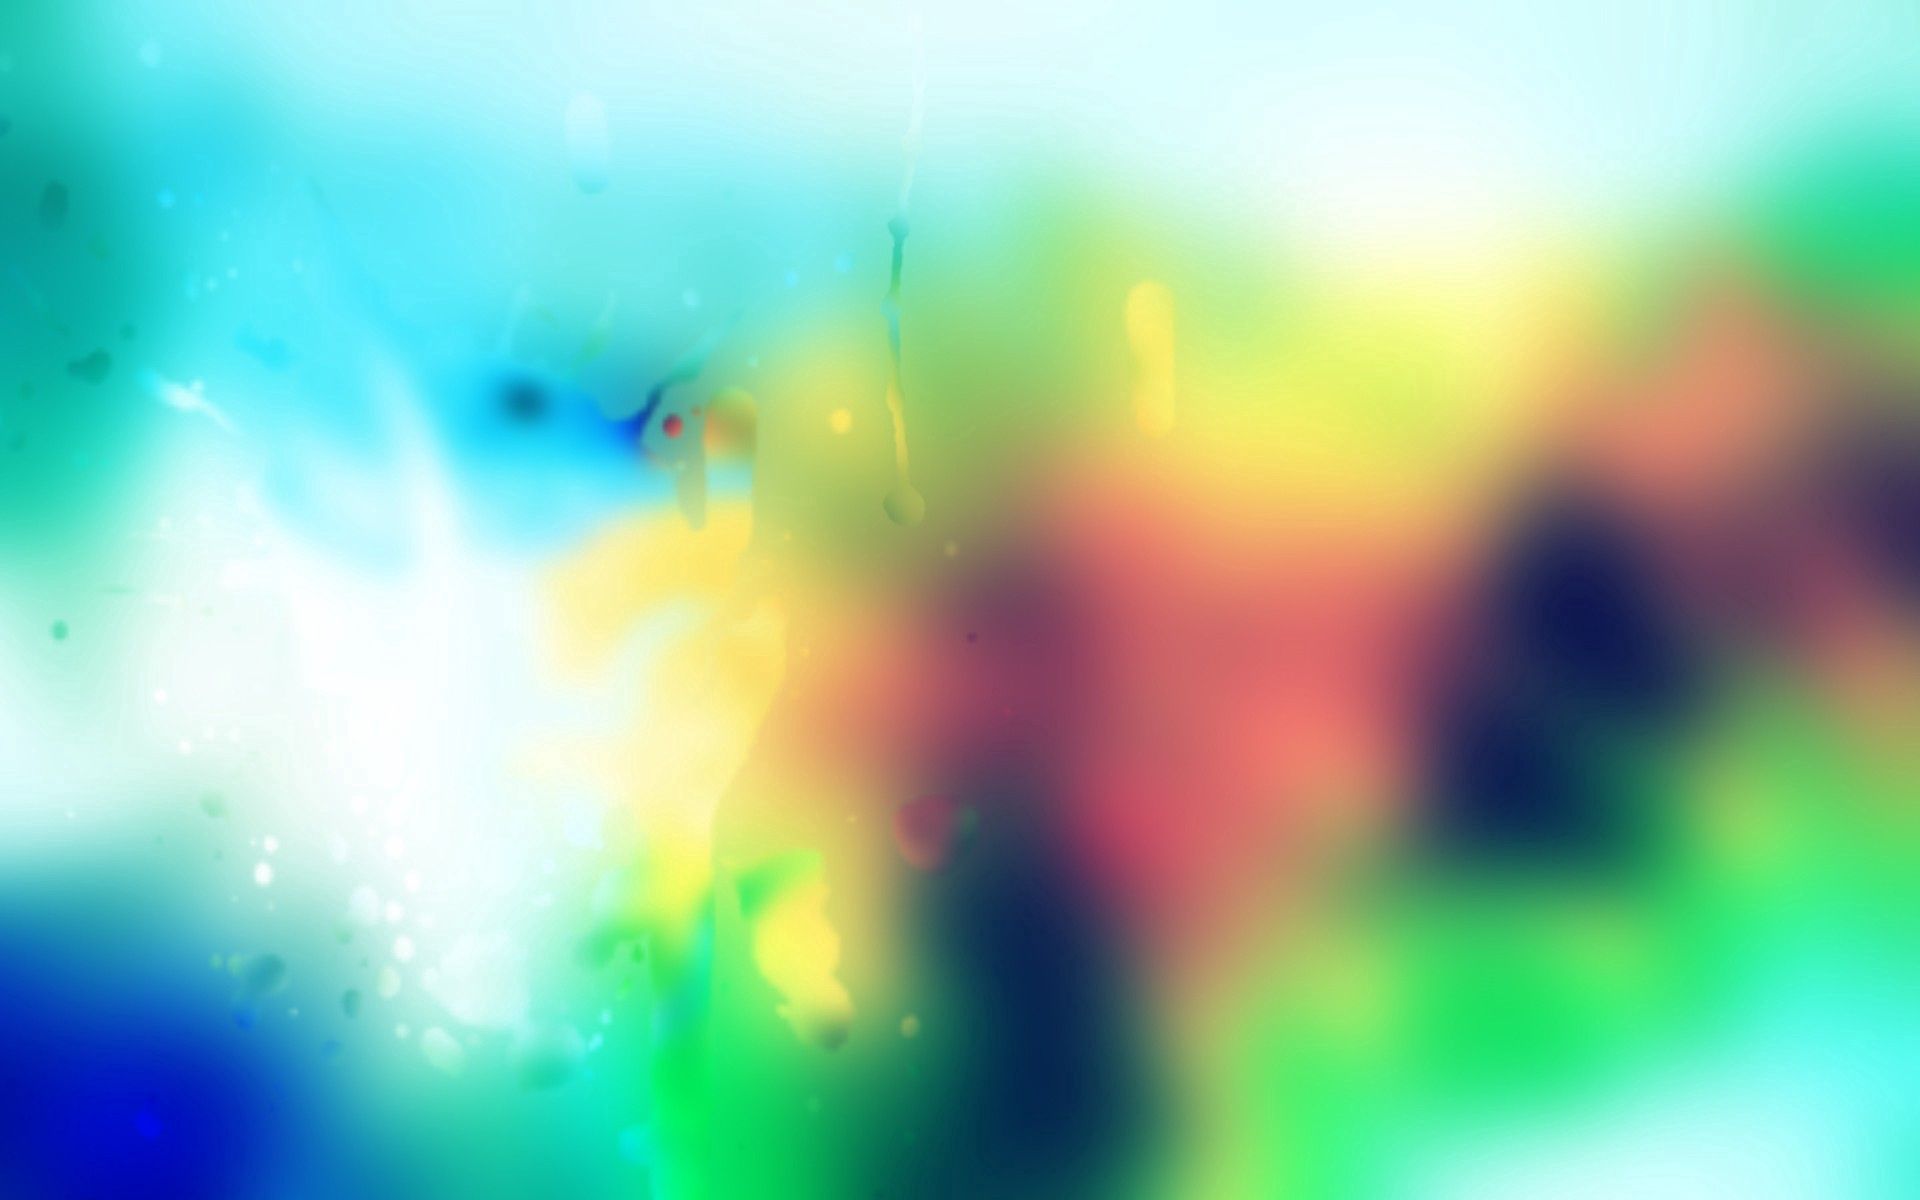 Ile colors color stains spots smooth drops blur abstract download the picture for free